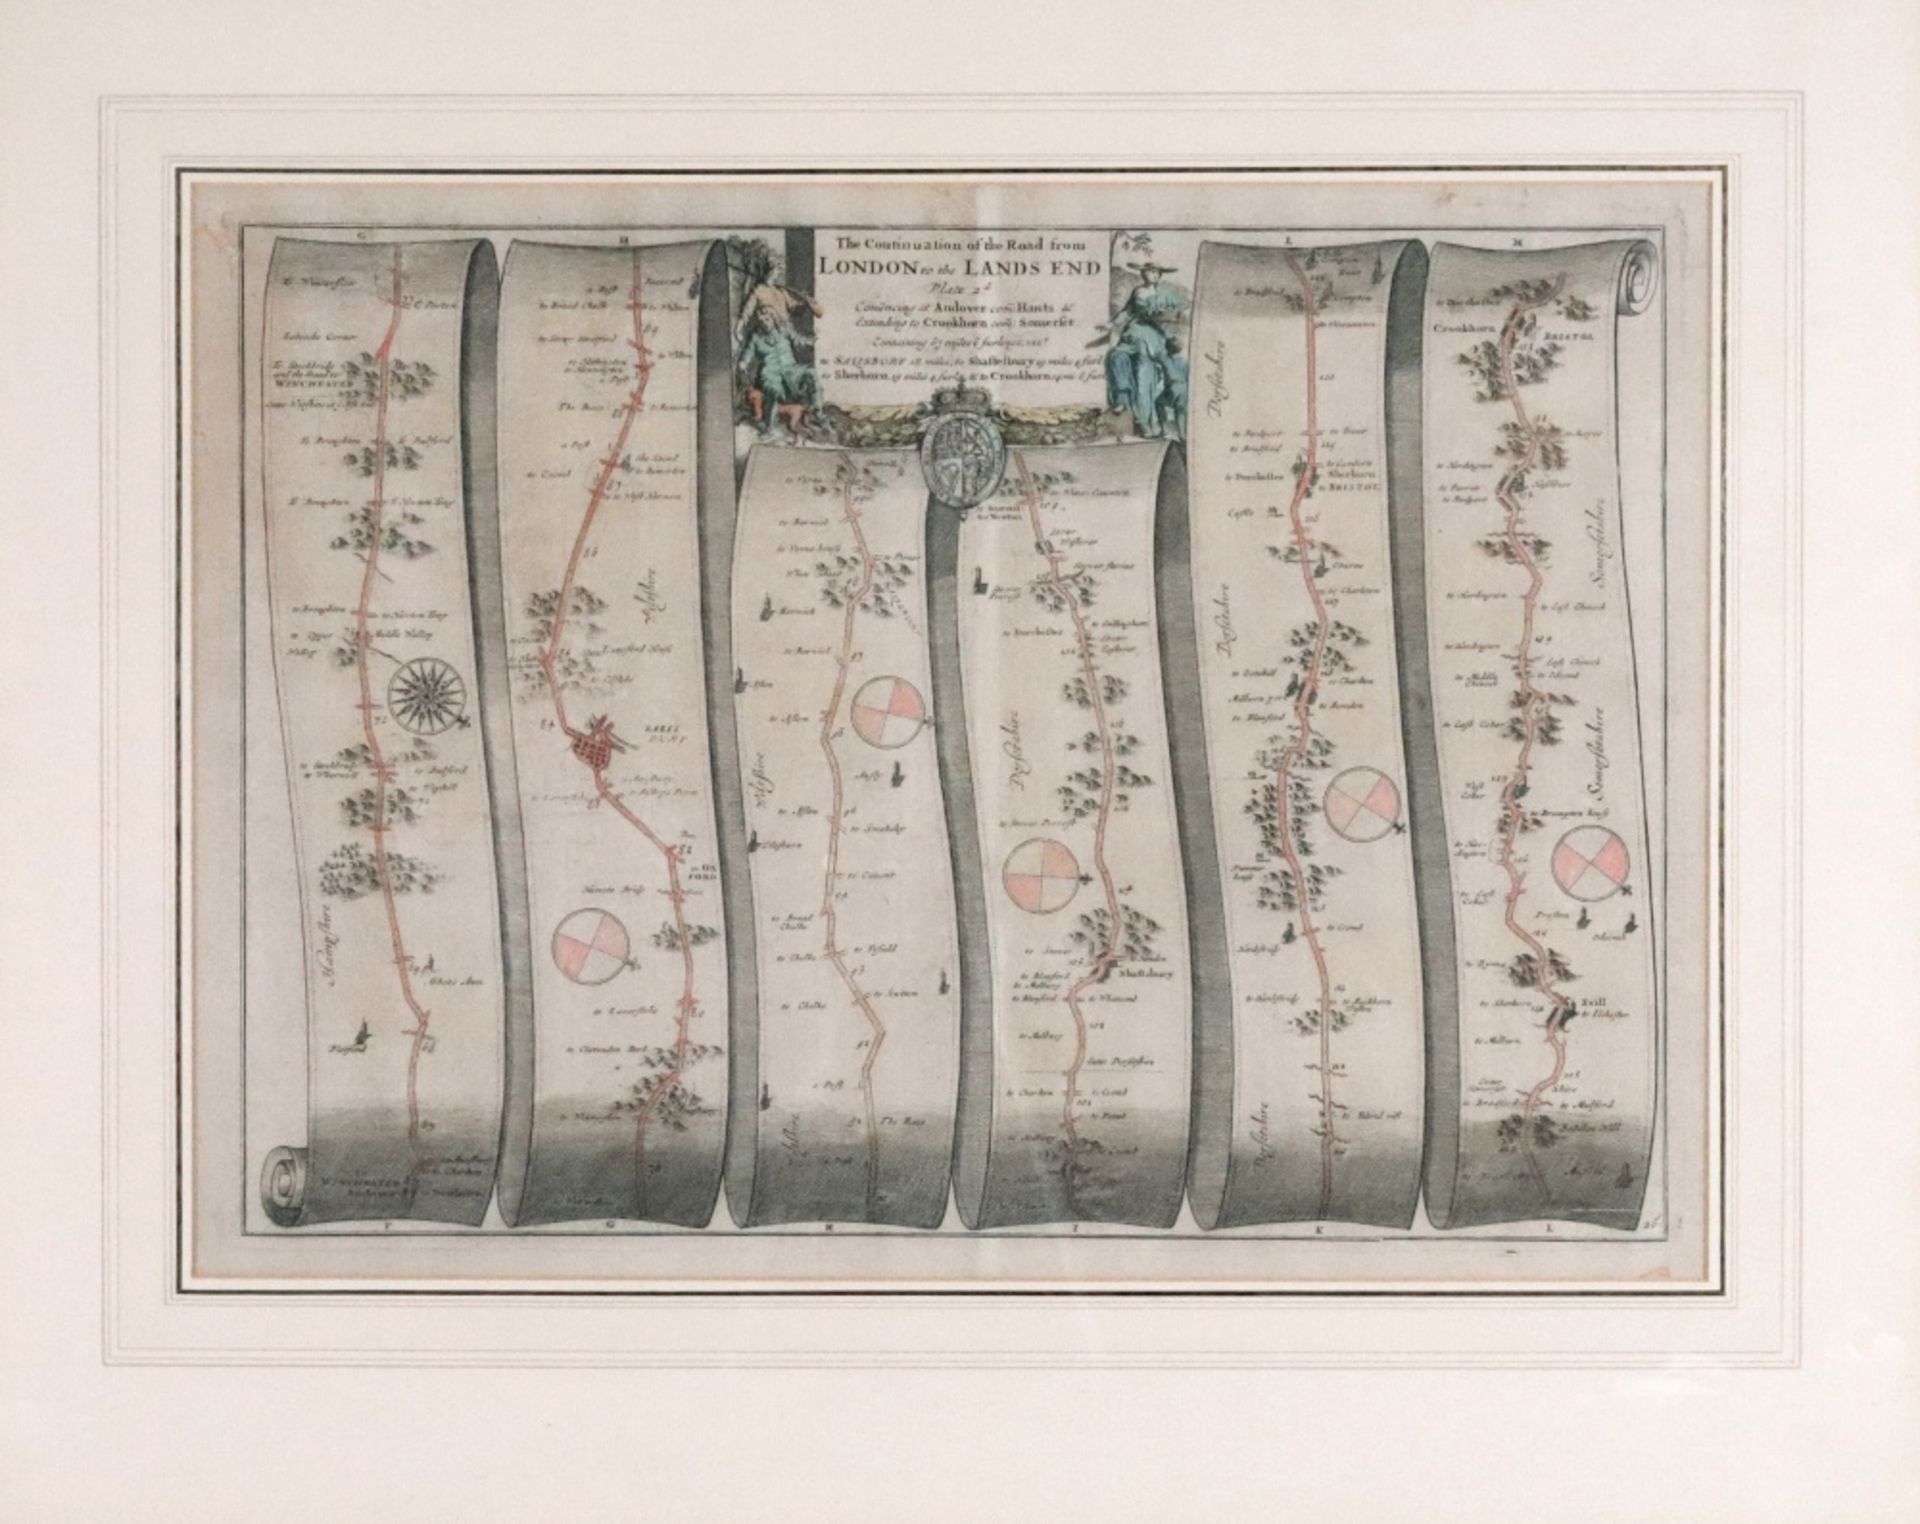 An engraved hand coloured strip map, the construction of the road from London to Lands End pate 2.